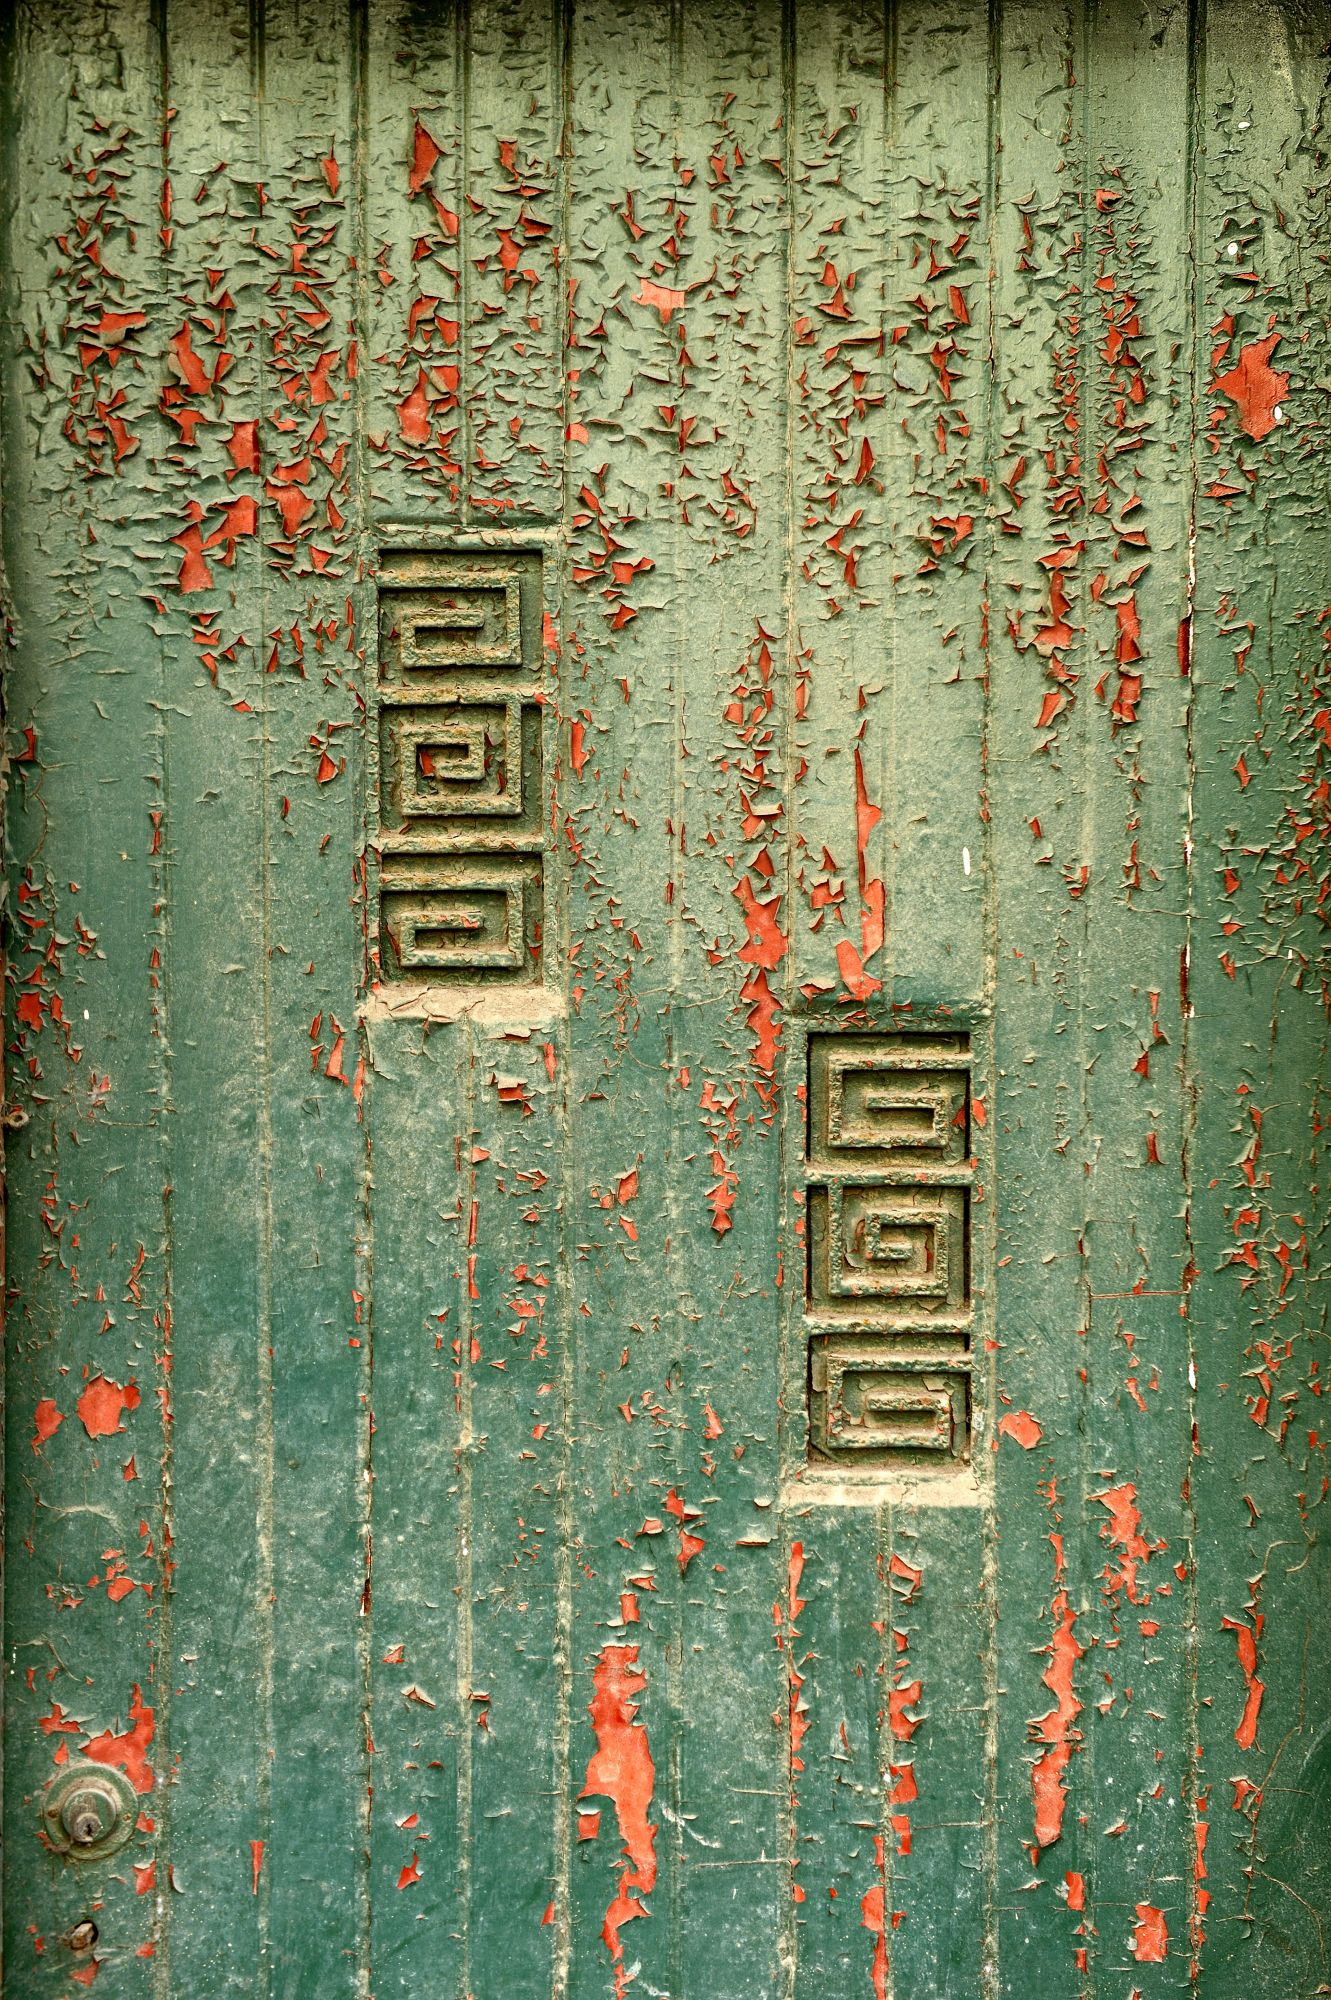 SMALL WALLS OF CHINA (selected work from the series) 